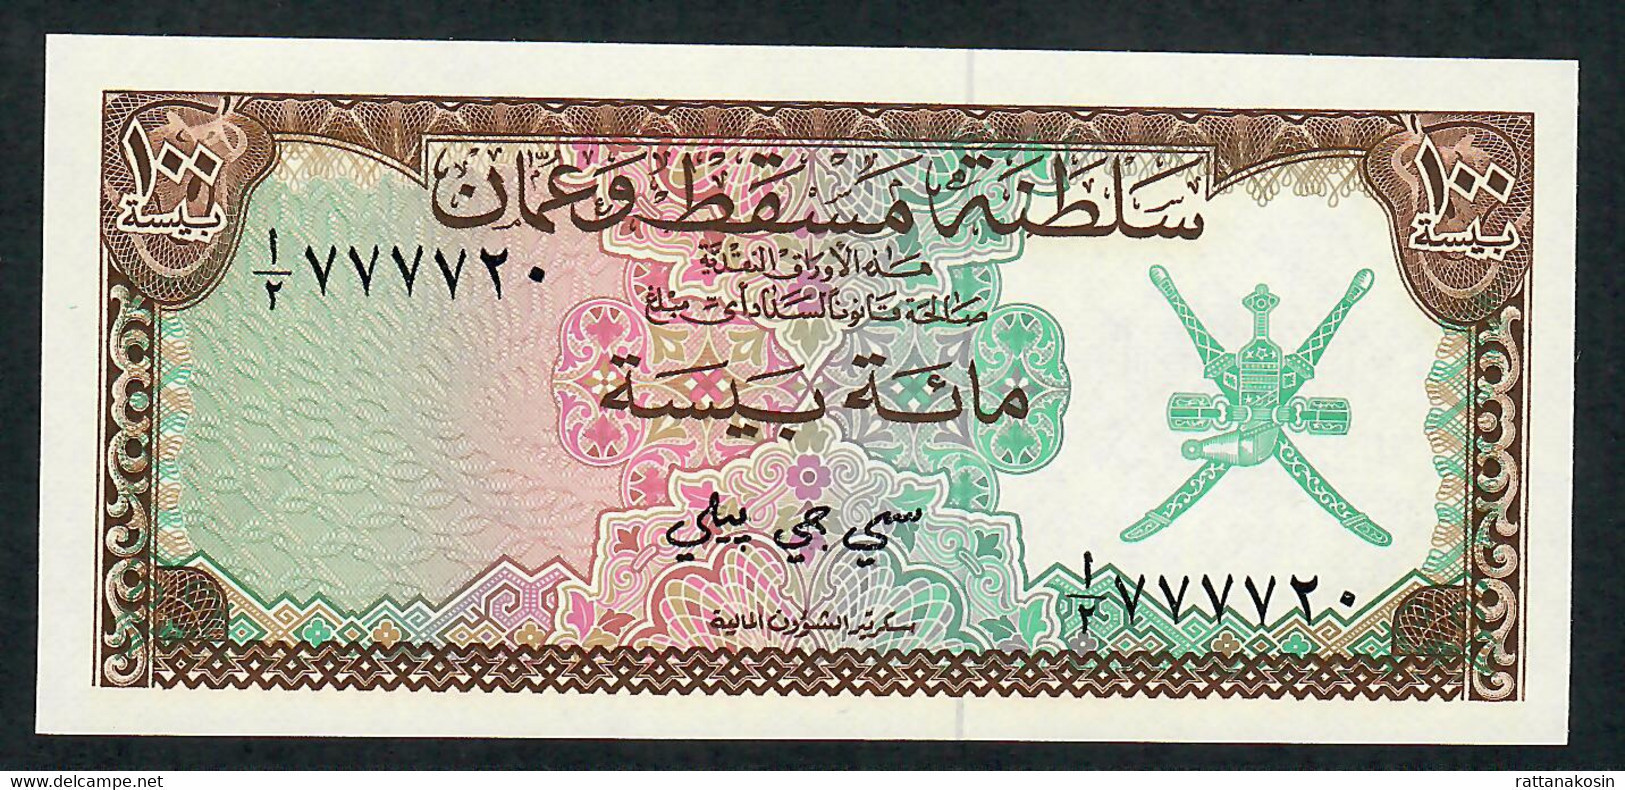 OMAN P1 100  BAISA 1970  "Sultanate Of Muscat And Oman"  #A/2   UNC. - Oman